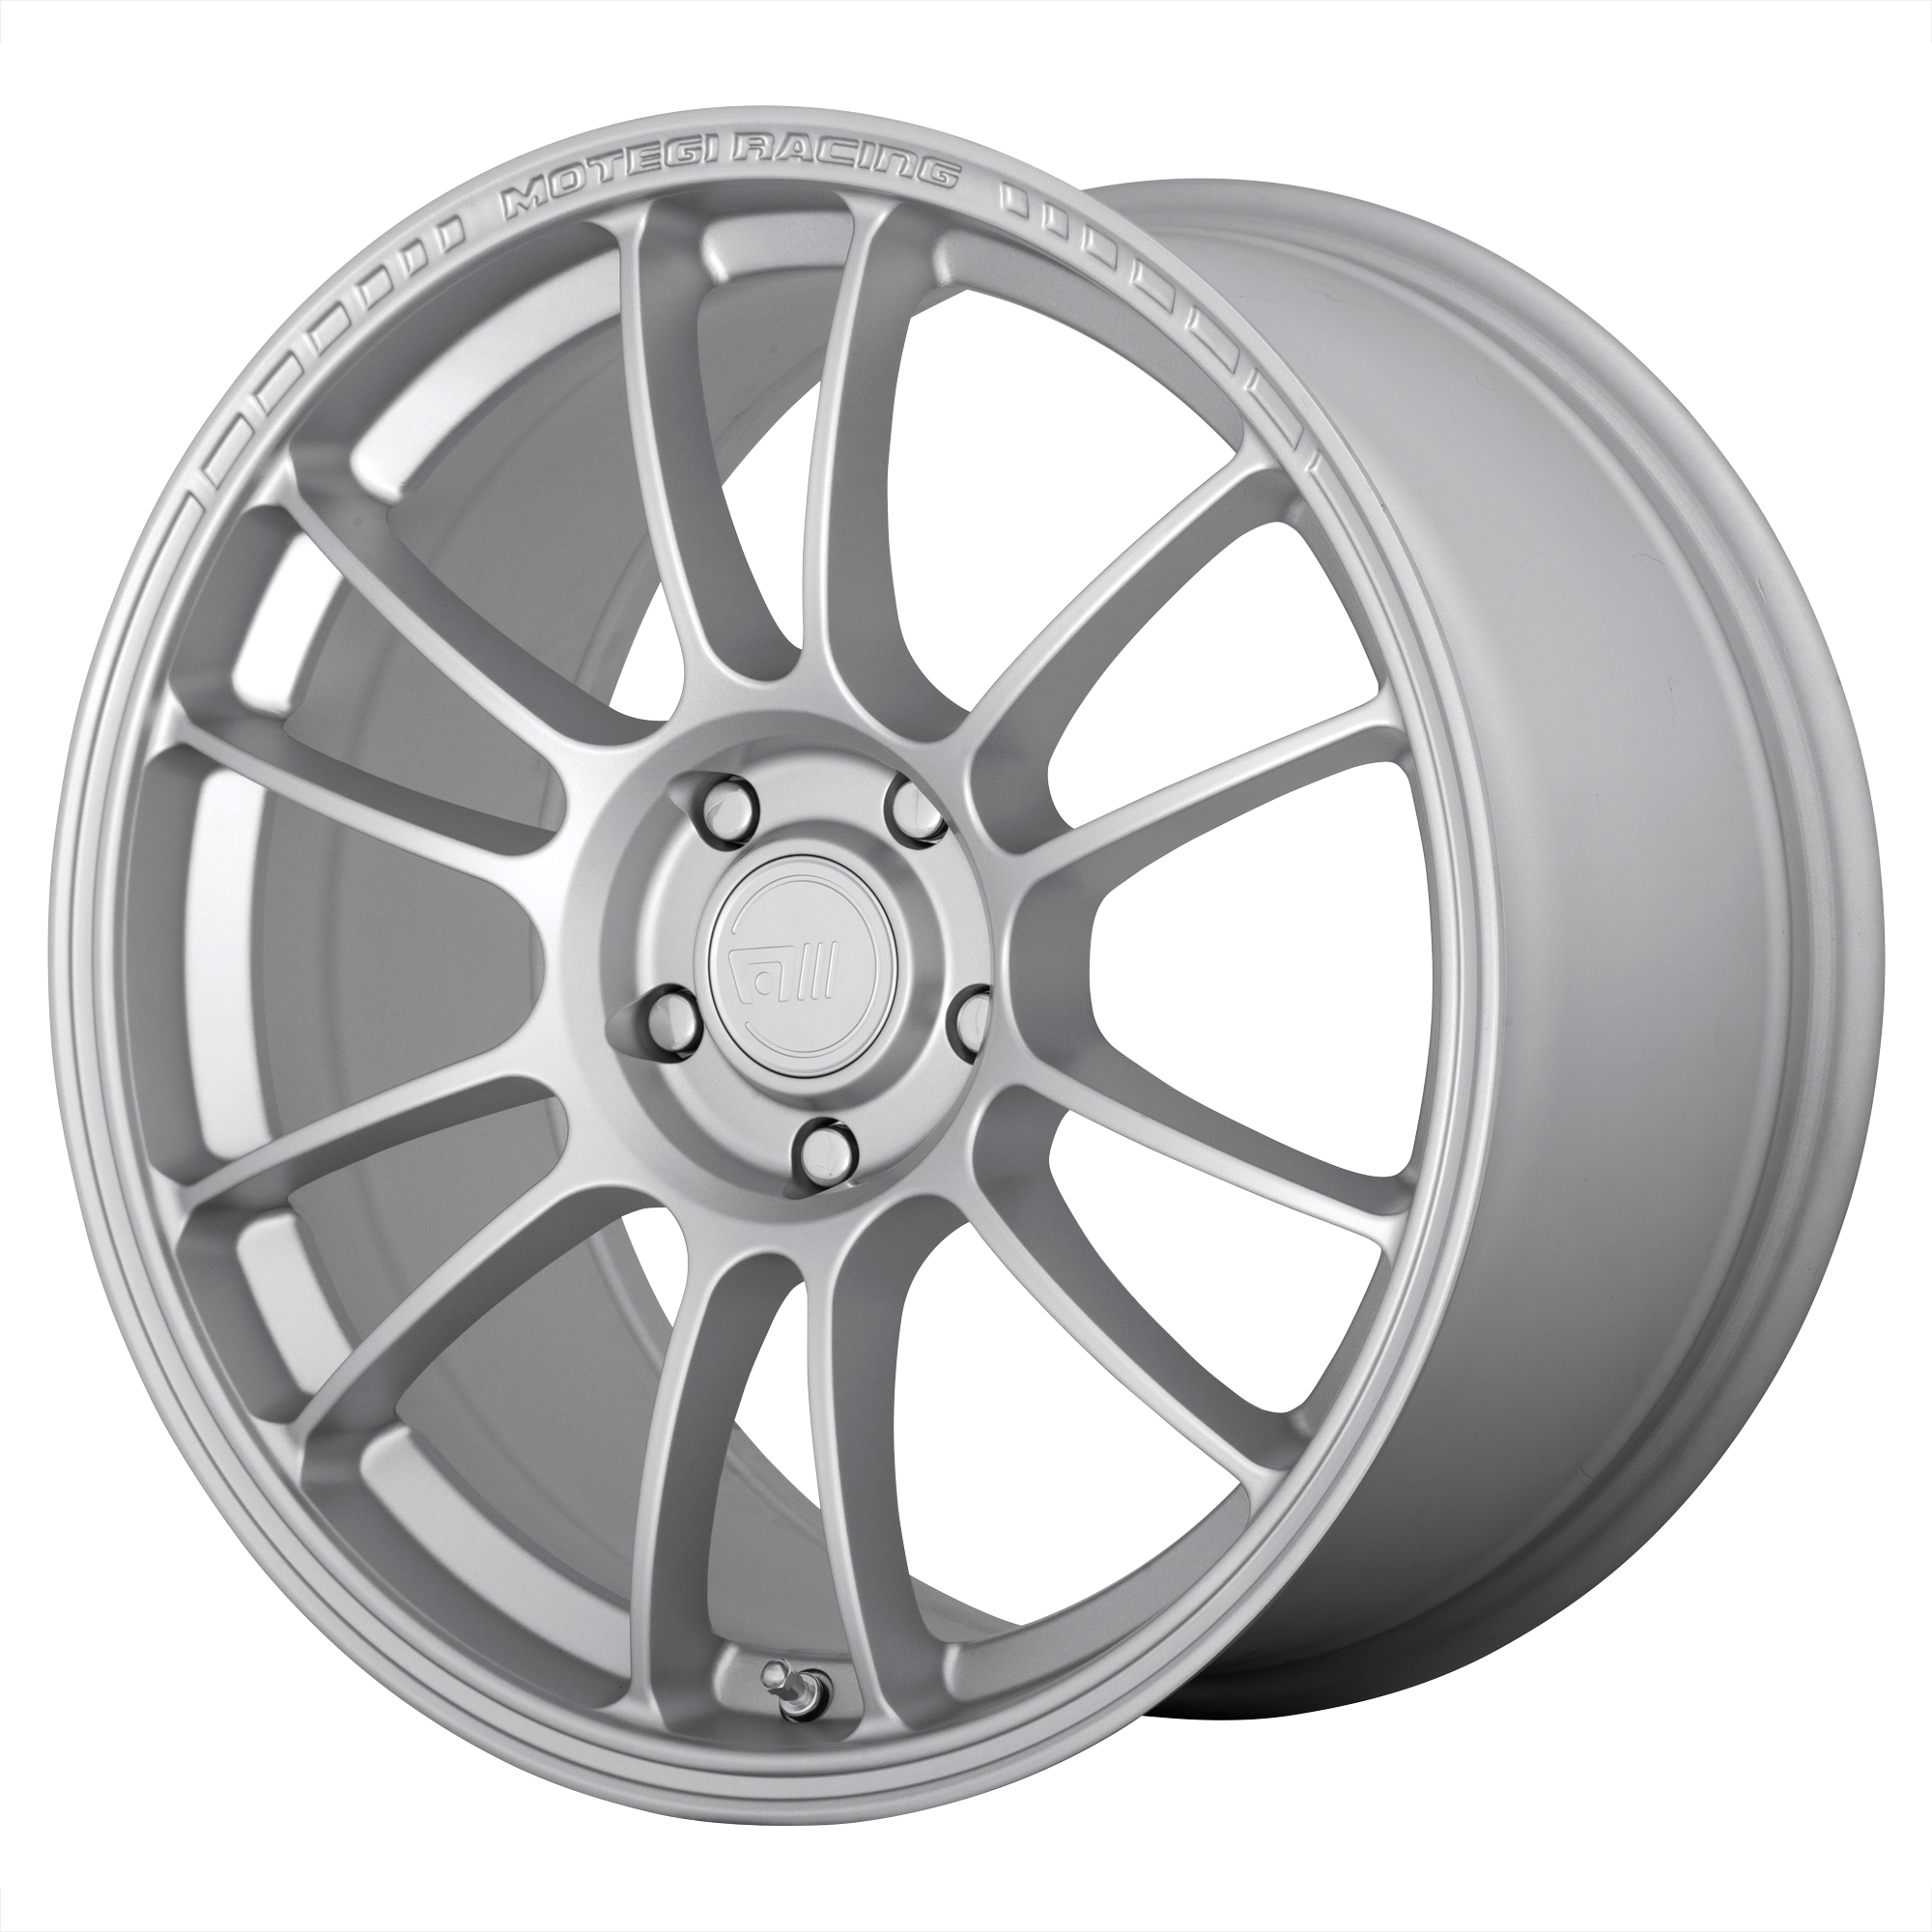 SS6 18x9.5 5x114.30 HYPER SILVER (45 mm) - Tires and Engine Performance